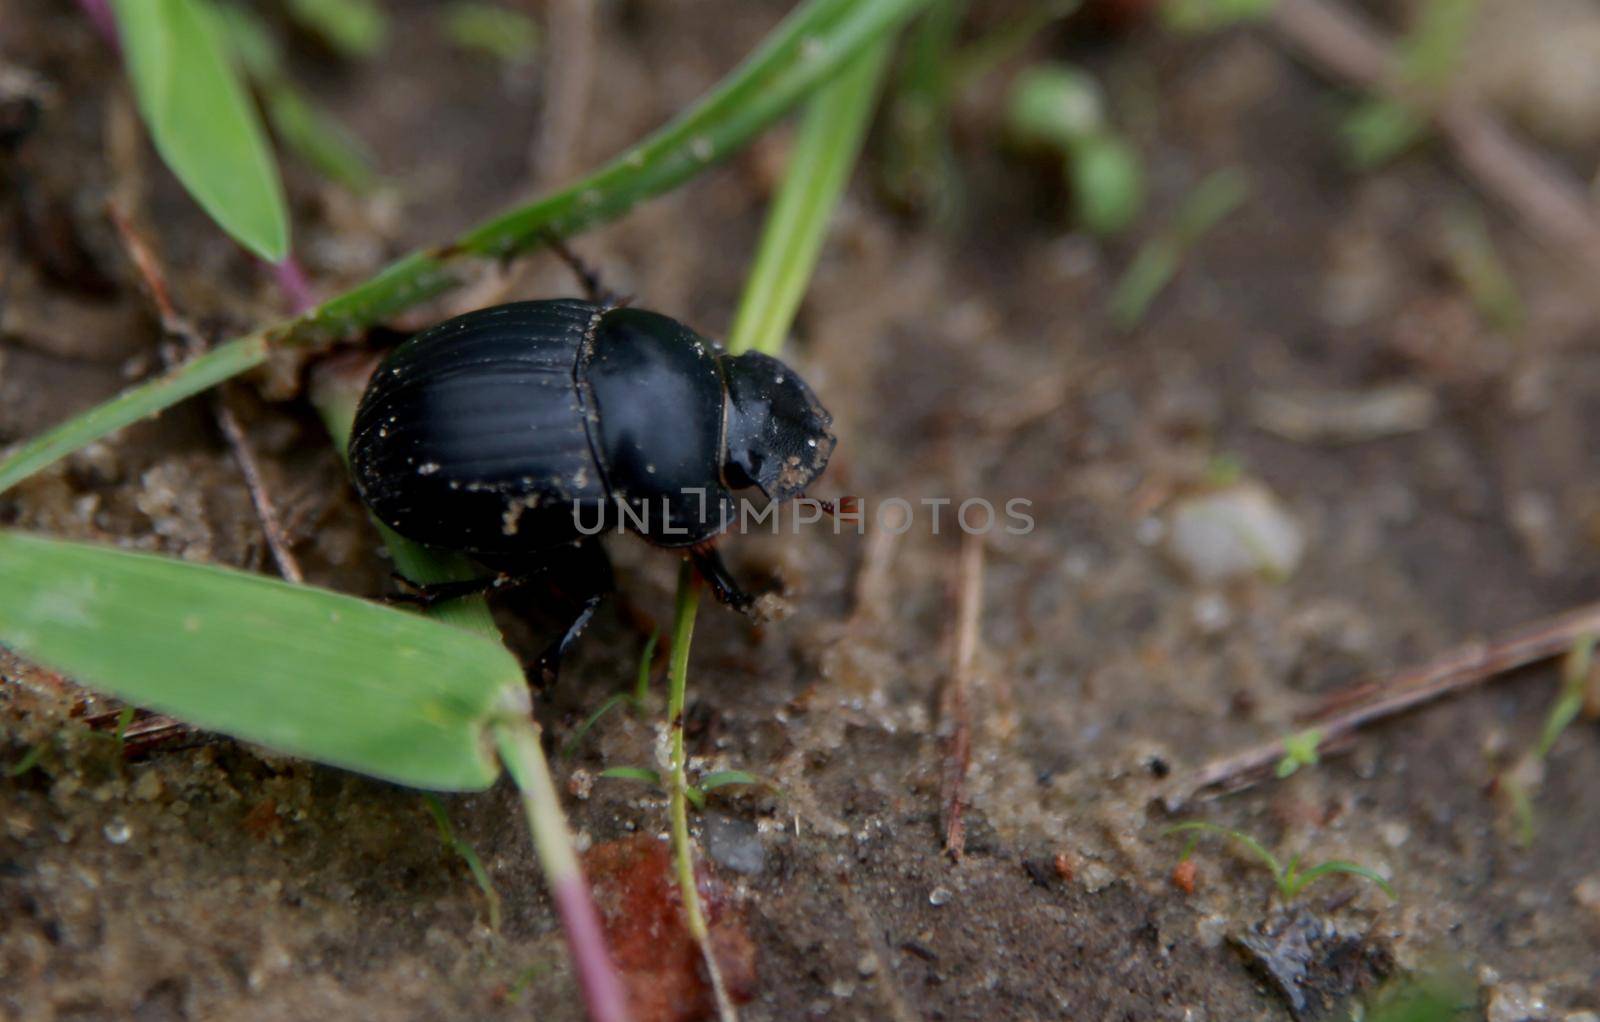 salvador, bahia / brazil - february 26, 2015: scarab beetle, popularly known as bug beetle is seen in a garden in the city of Salvador.

